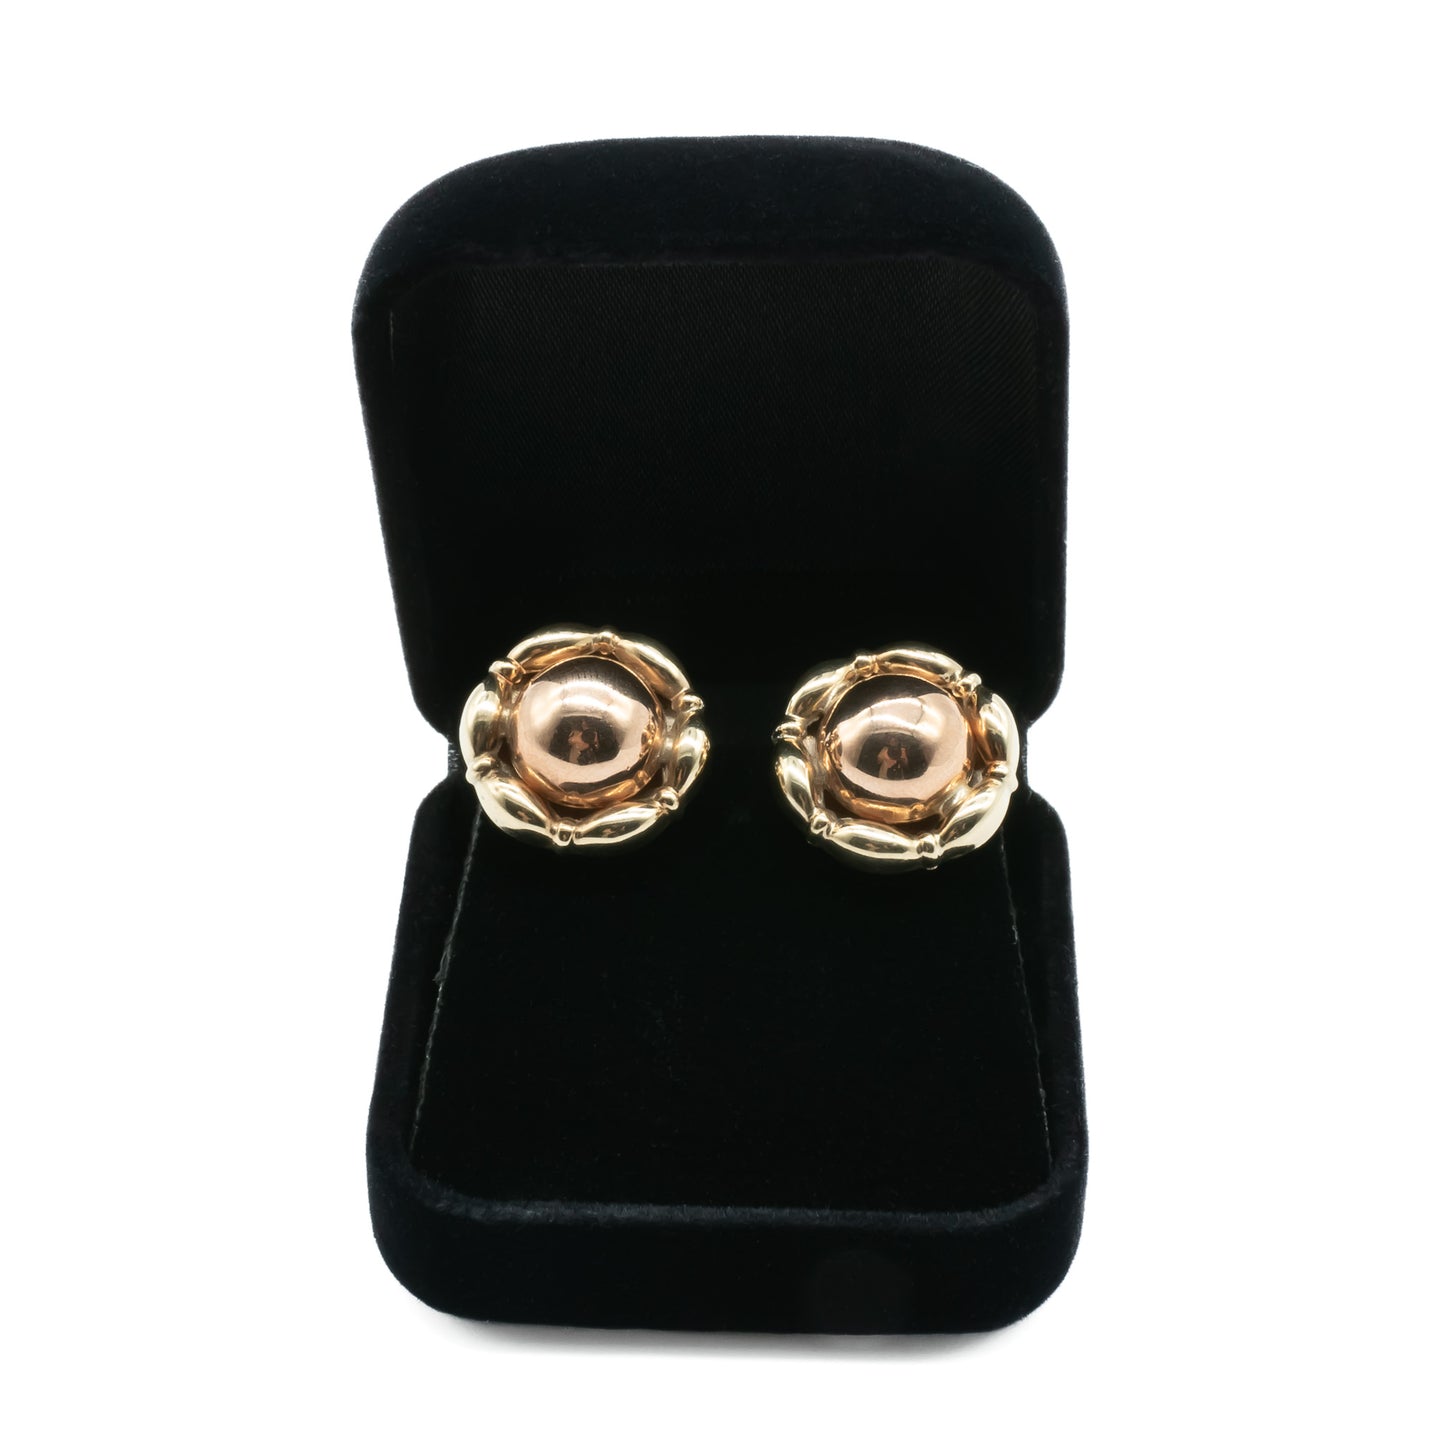 Classic 9ct yellow gold stud earrings with rose gold domes in centre.